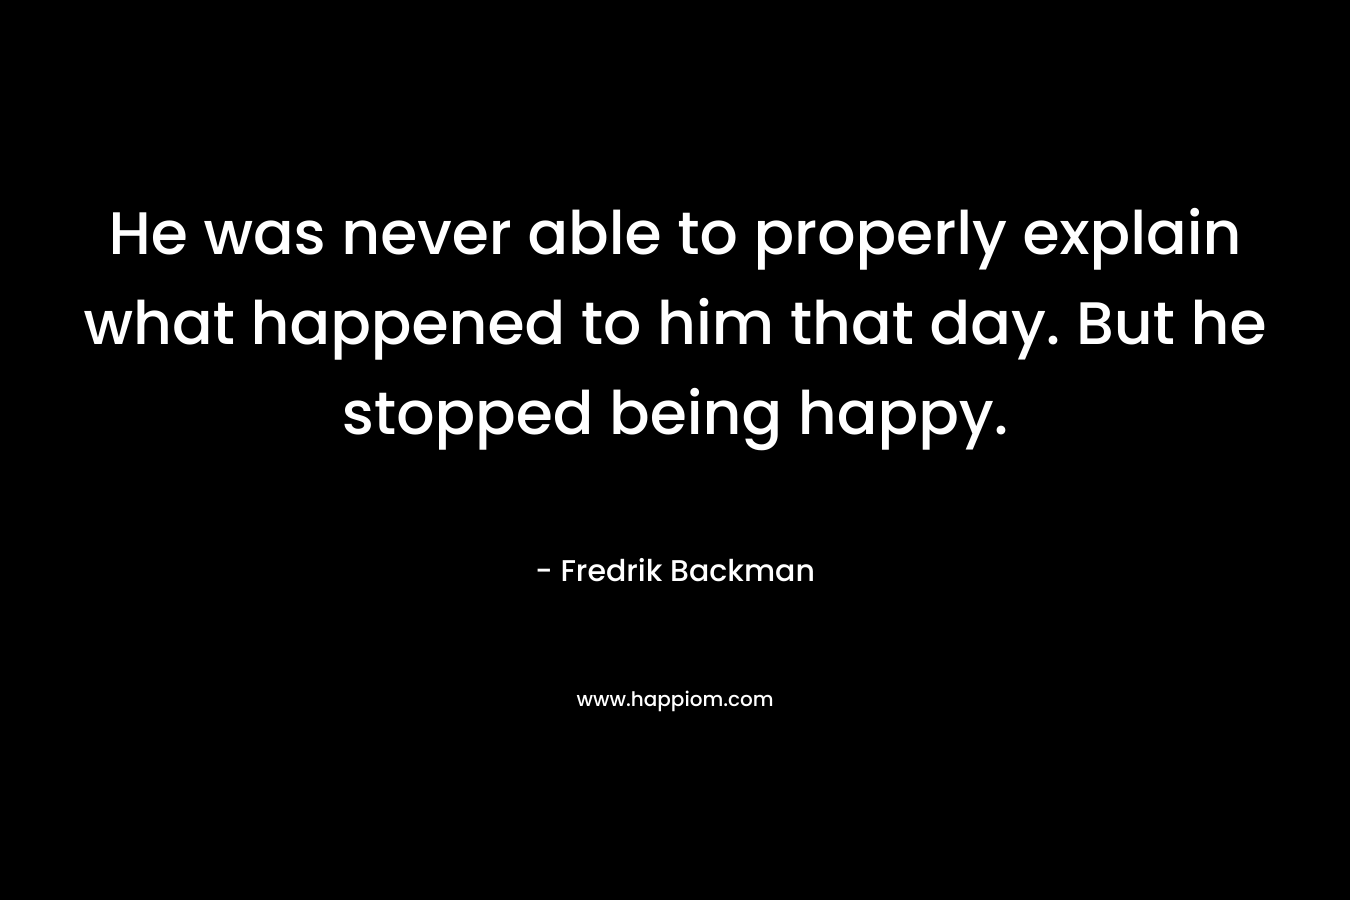 He was never able to properly explain what happened to him that day. But he stopped being happy.